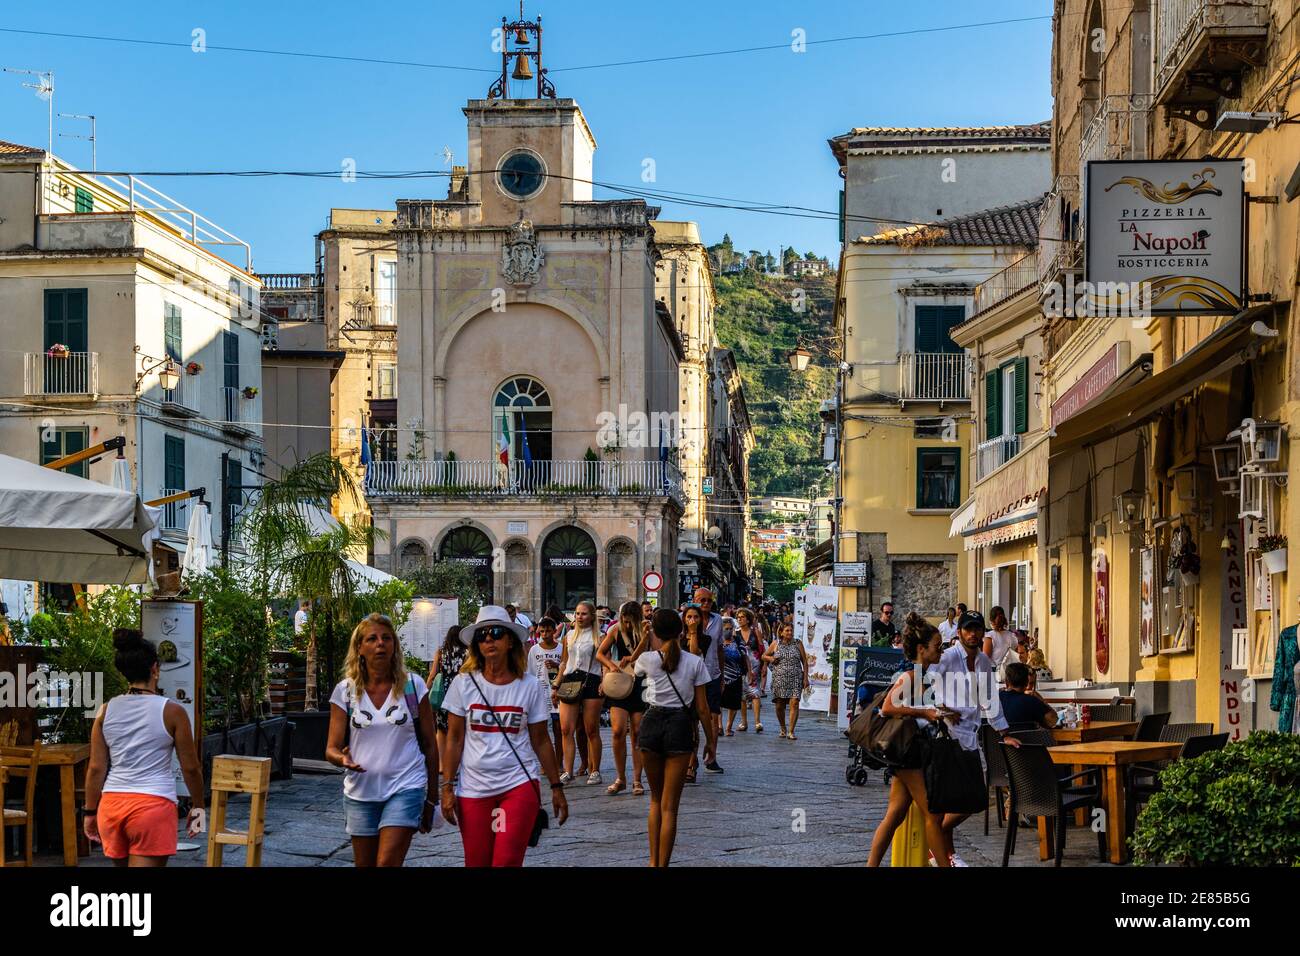 Tropea, Calabria Italy – Aug. 2020: Crowd of tourists strolling in the main street of Tropea (Corso Vittorio Emanuele) during summer season Stock Photo